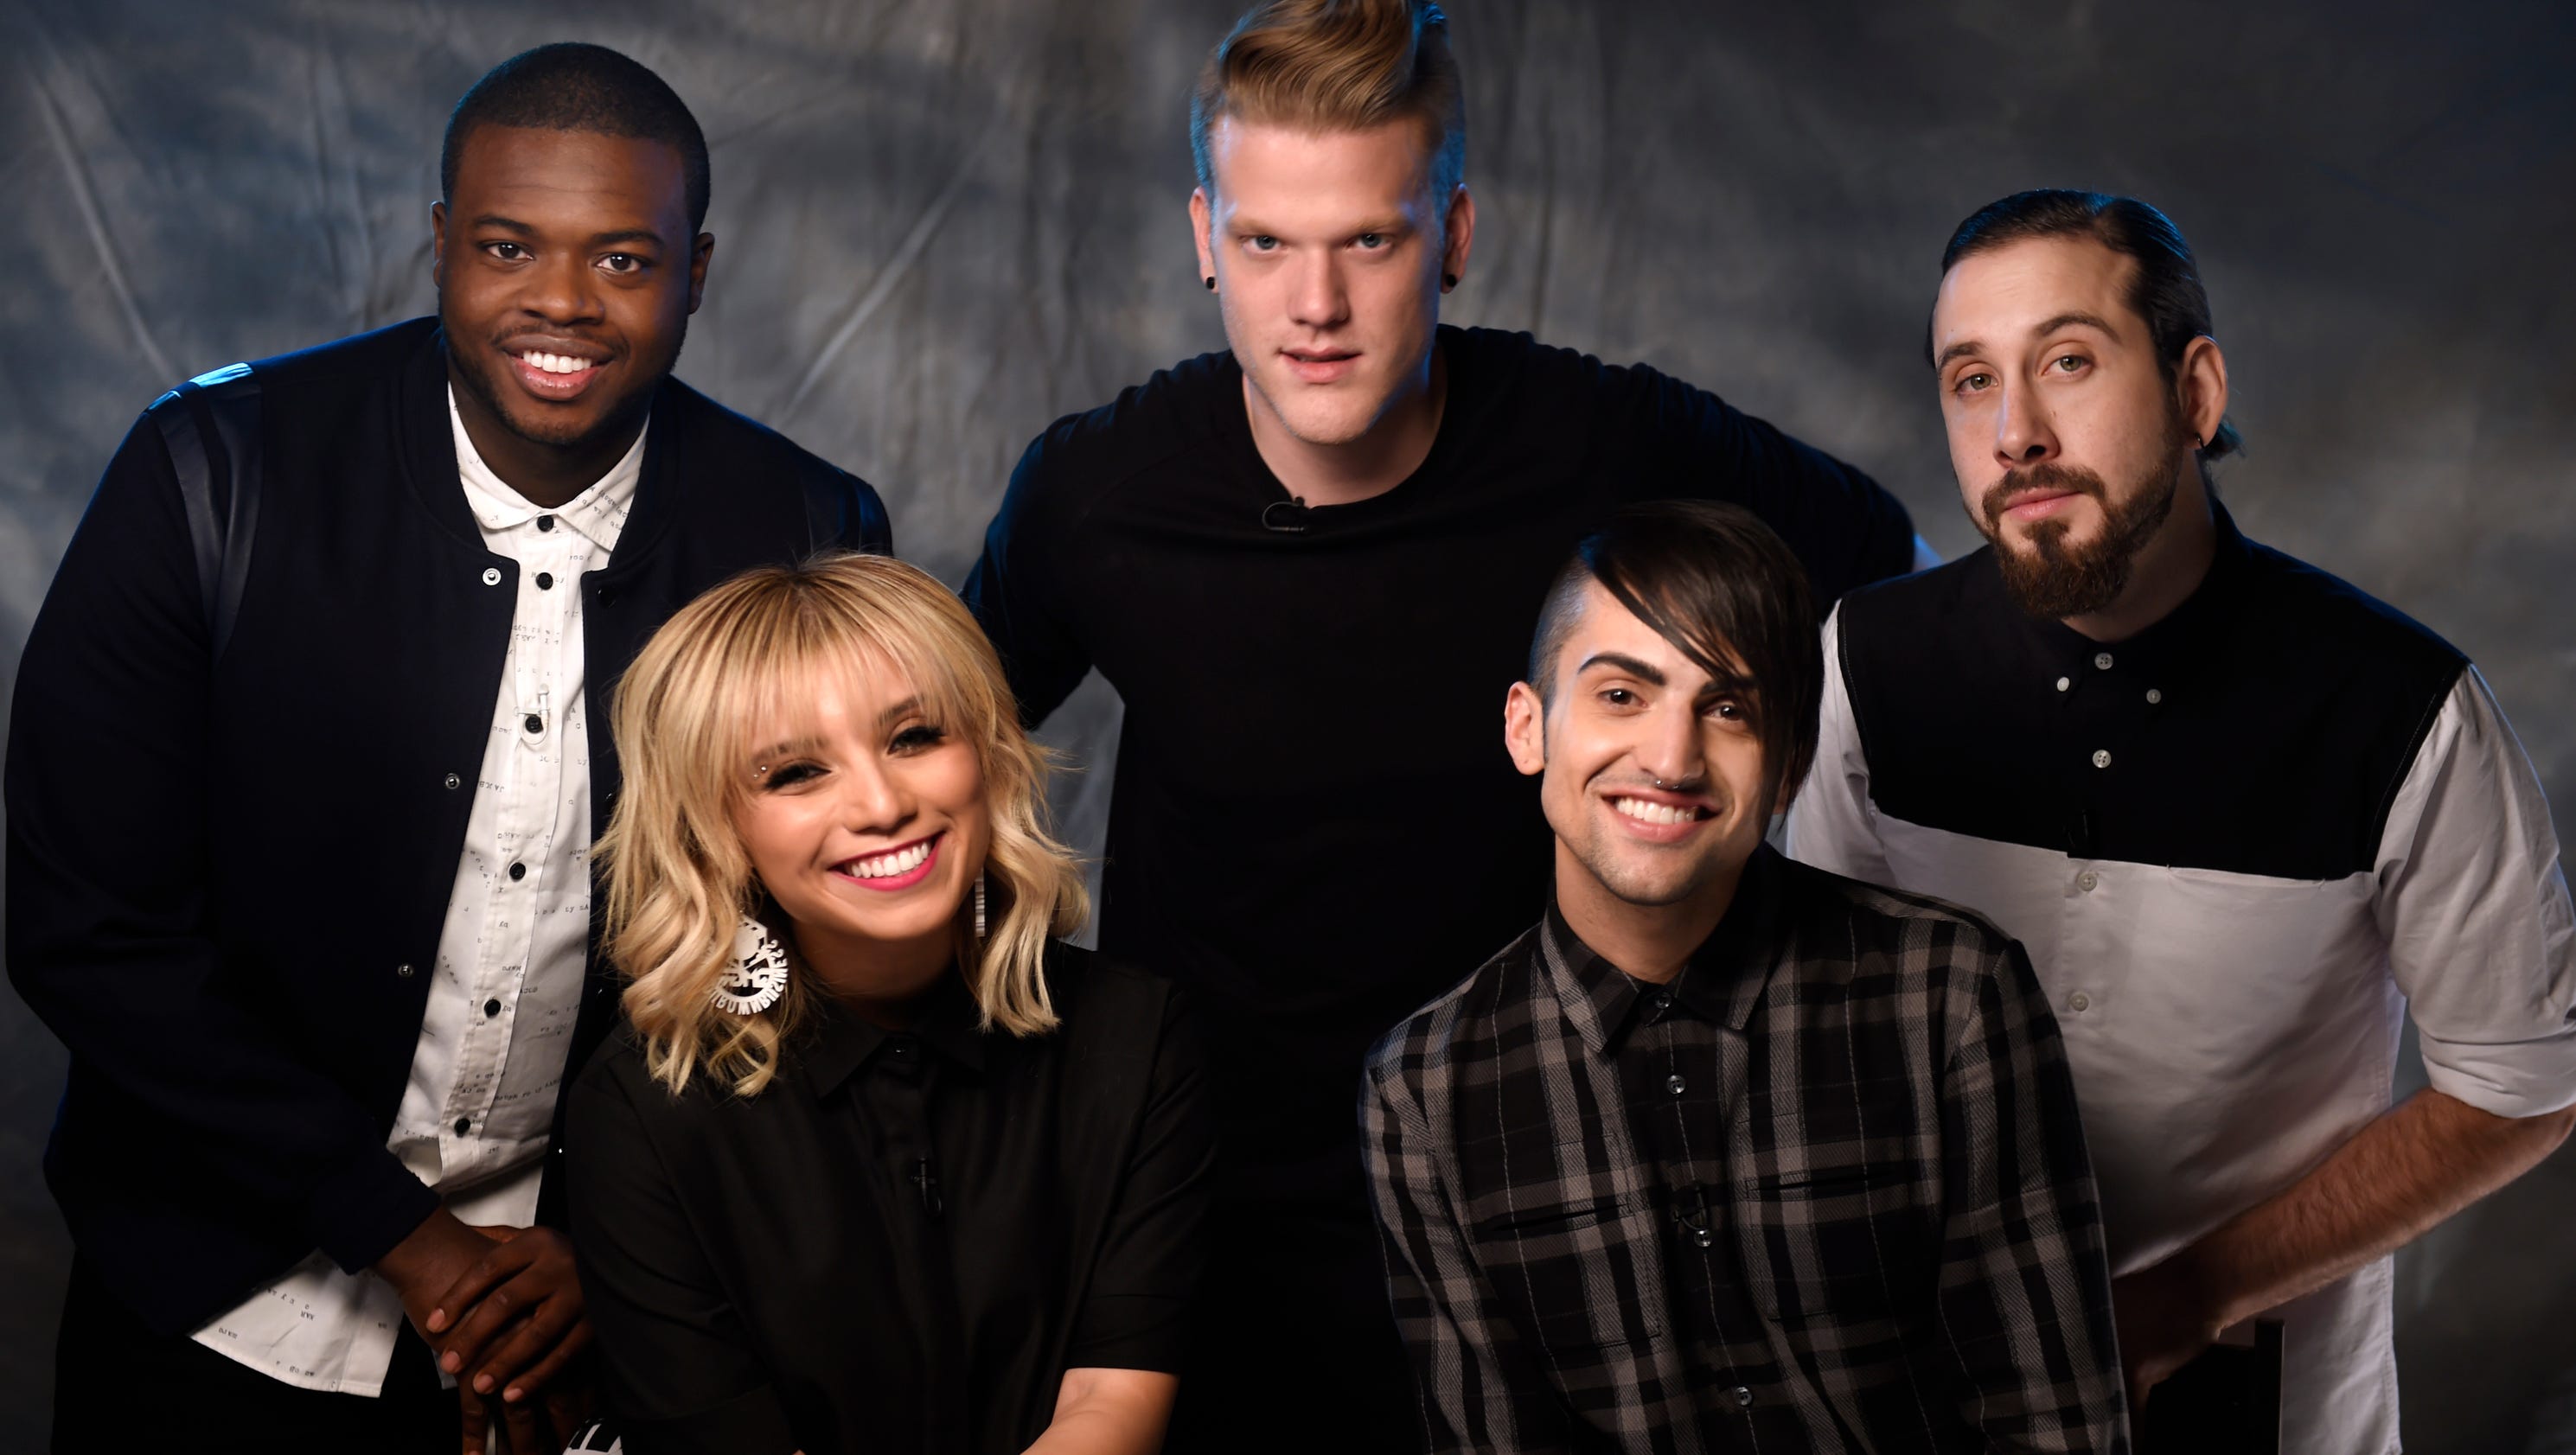 Does Pentatonix Have The Voice For Radio